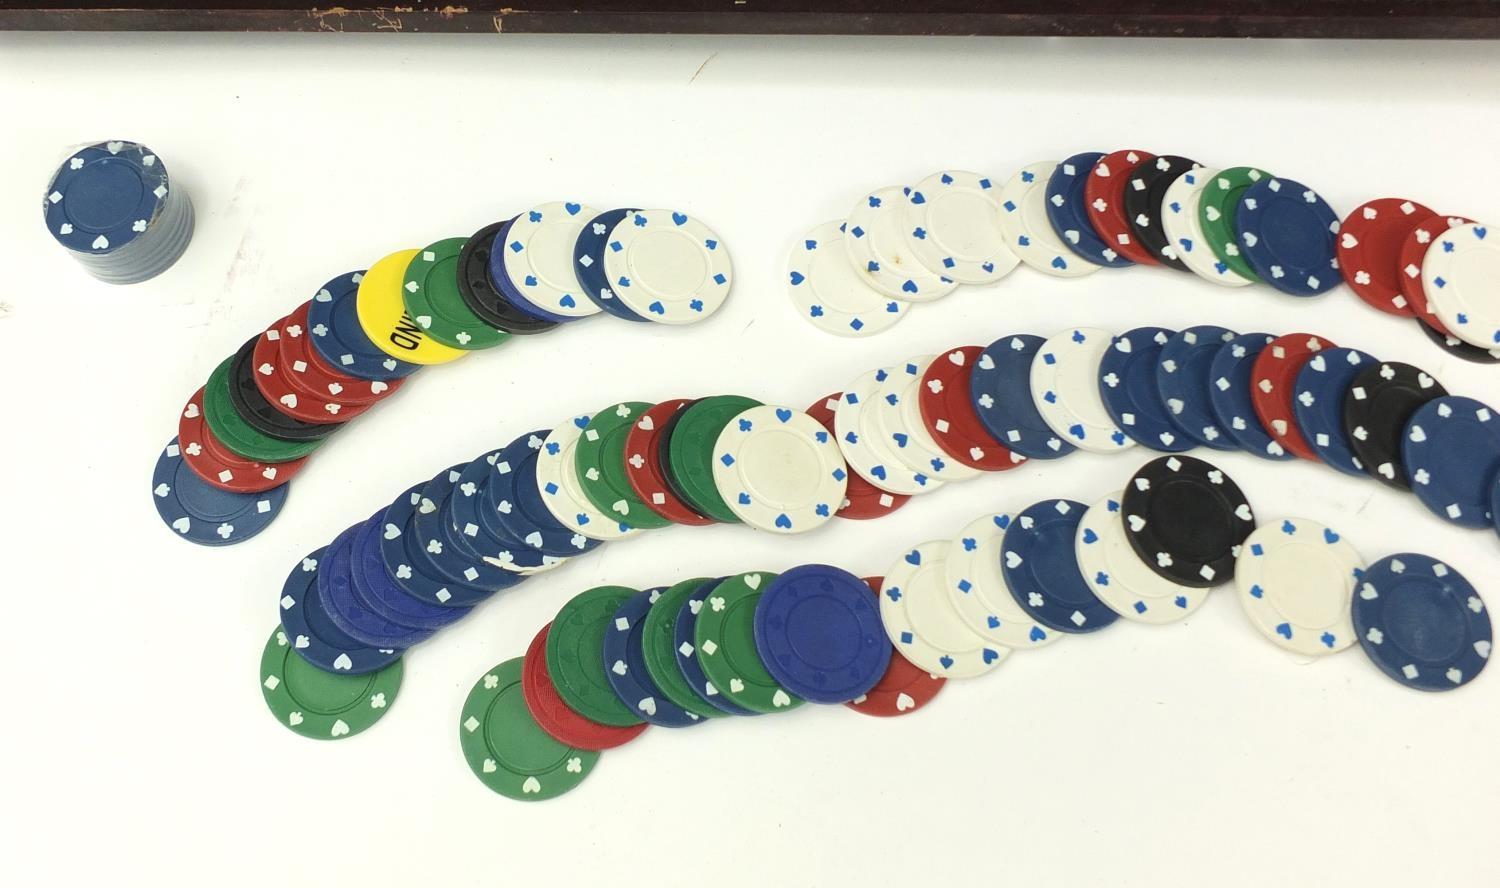 Blackjack poker set with chips, 78cm wide :For Further Condition Reports Please Visit Our Website- - Image 6 of 11